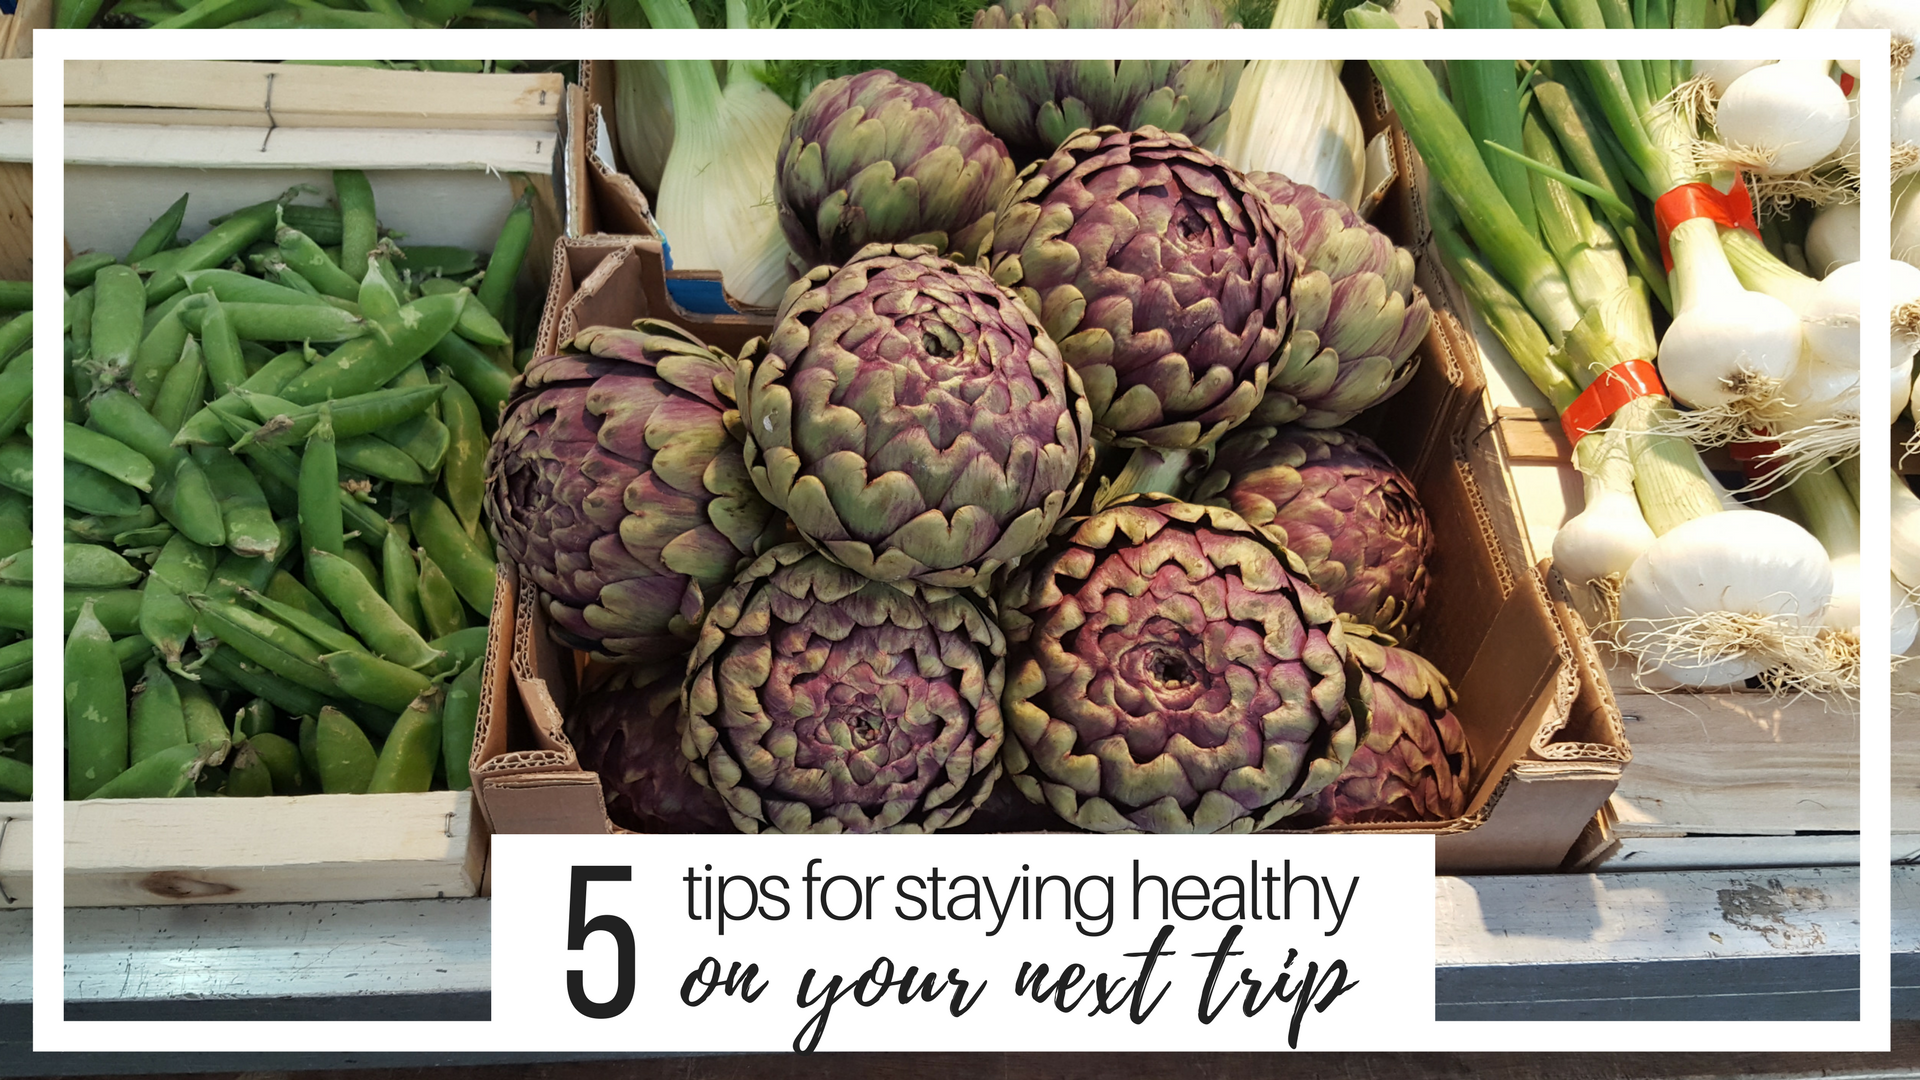 A display of produce and text that reads "5 Tips for staying healthy on your next trip"